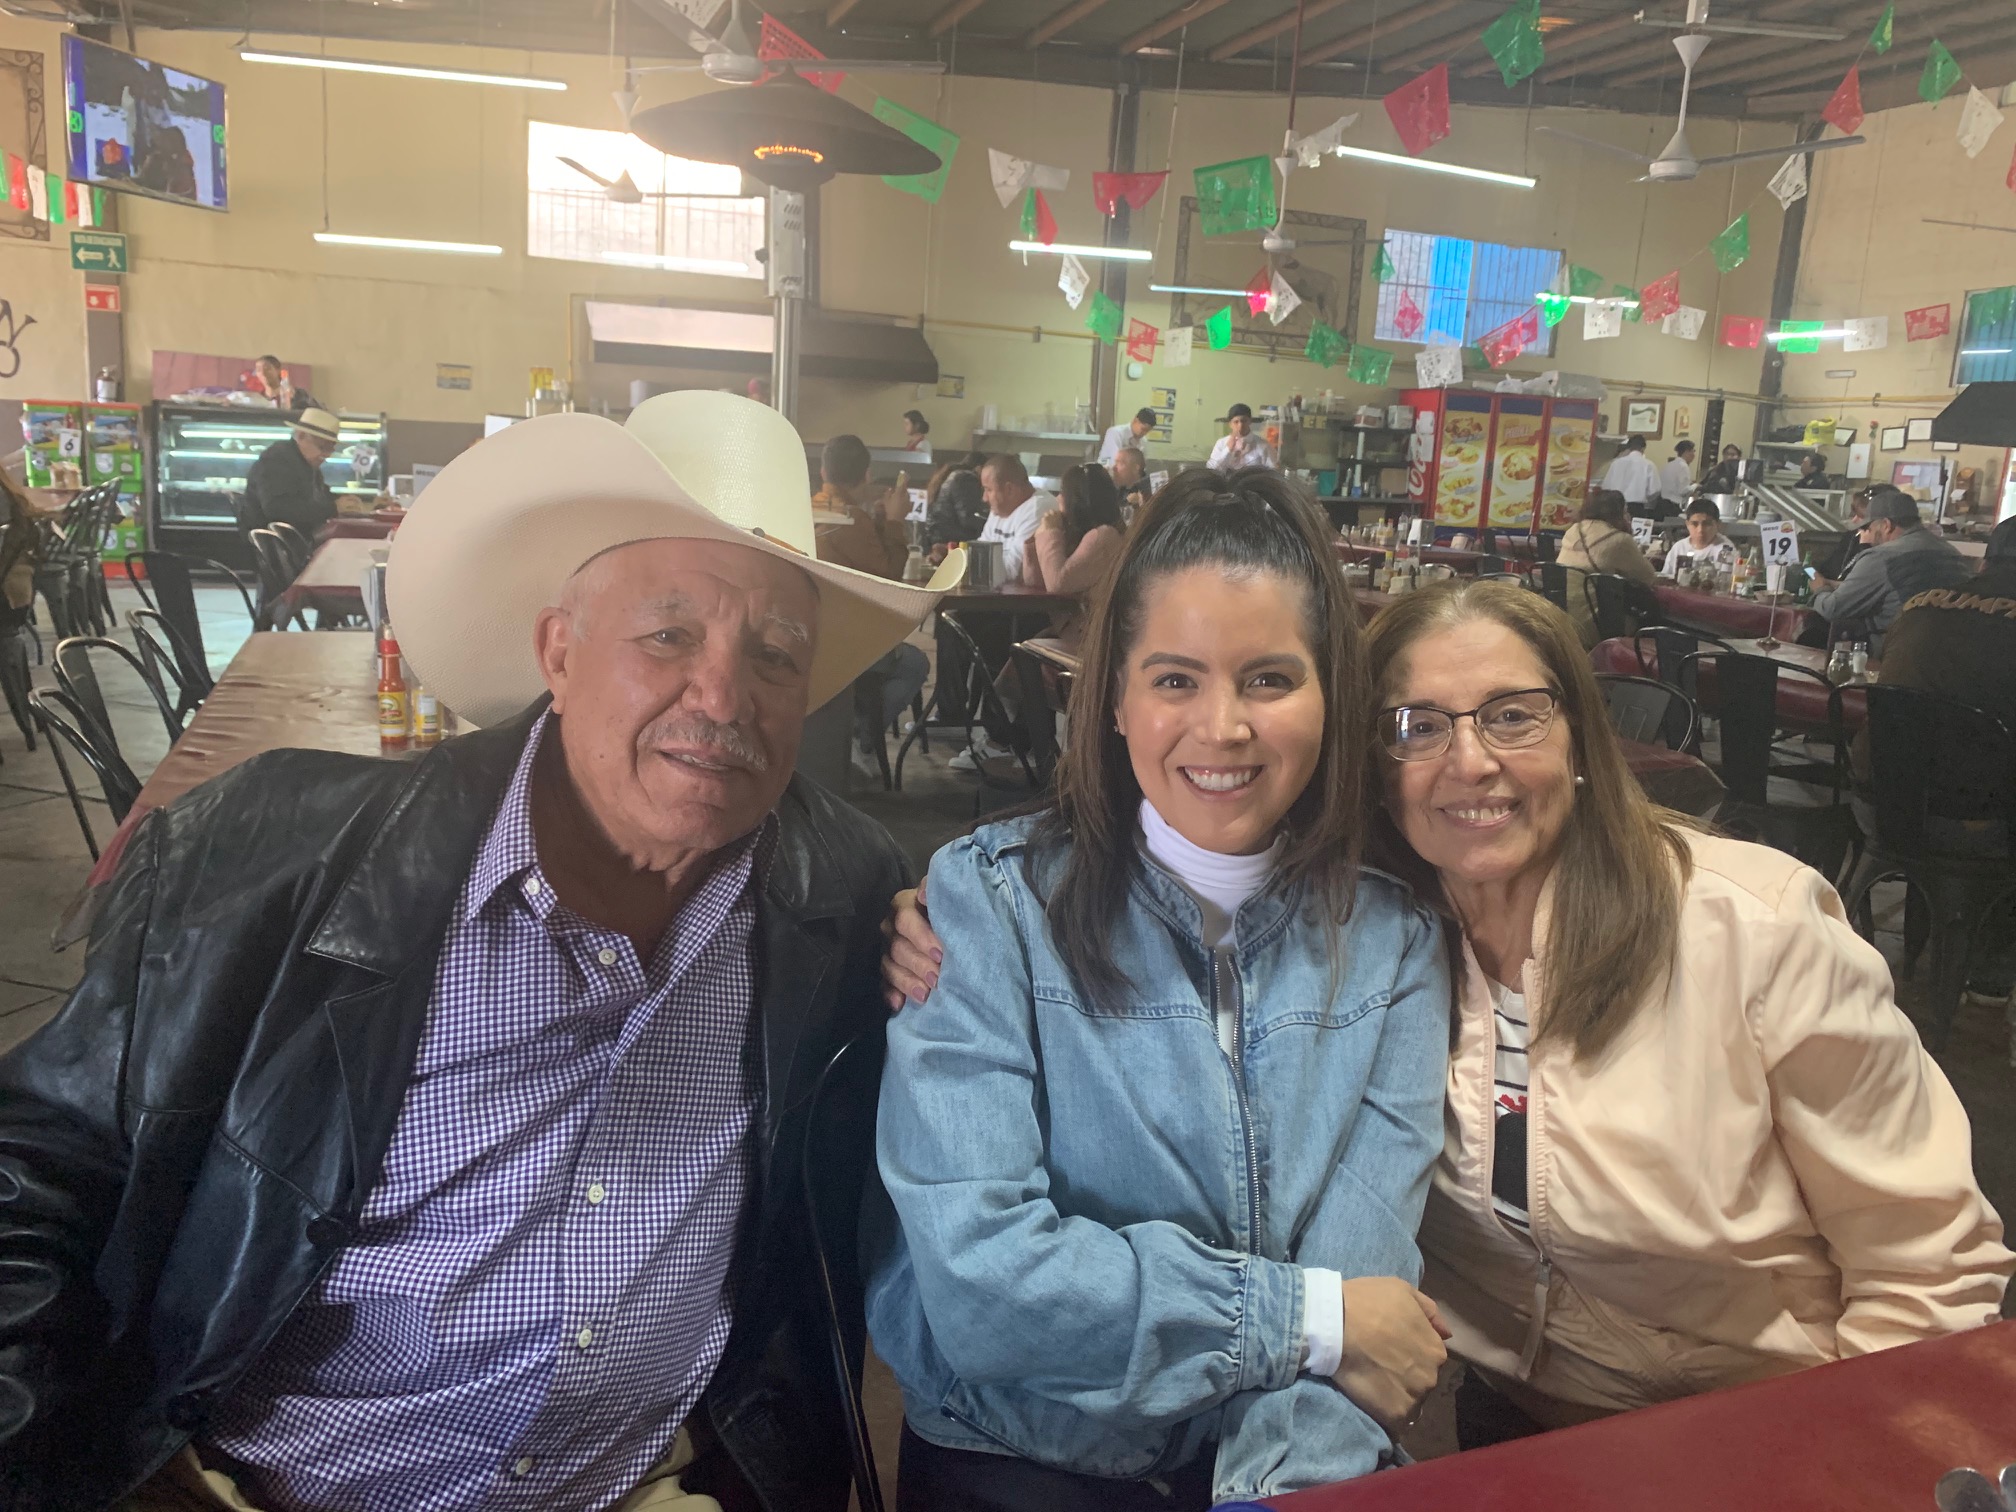 Attorney Jizell Lopez has a close and special relationship with her grandparents, Manuel and Julieta.